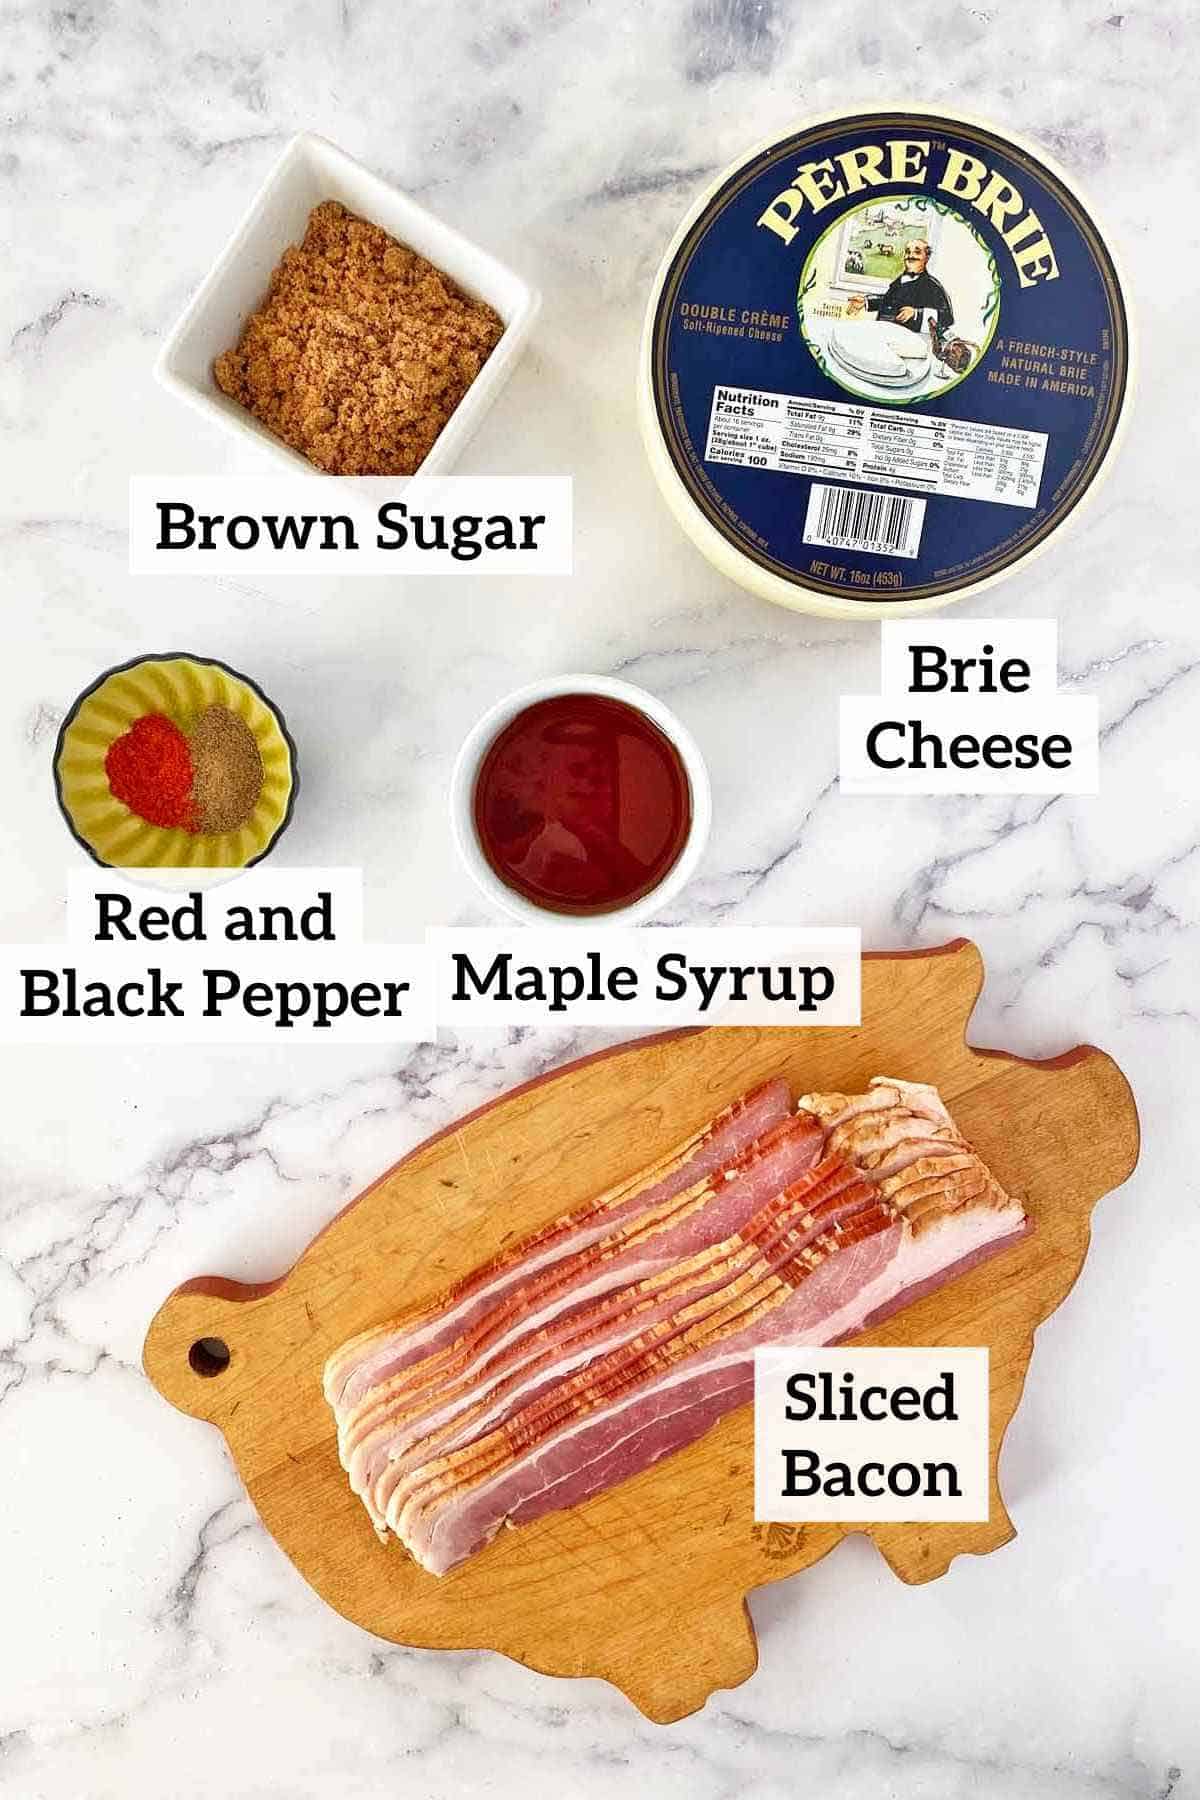 Brown sugar, Brie Cheese, red and black pepper, maple syrup and bacon.